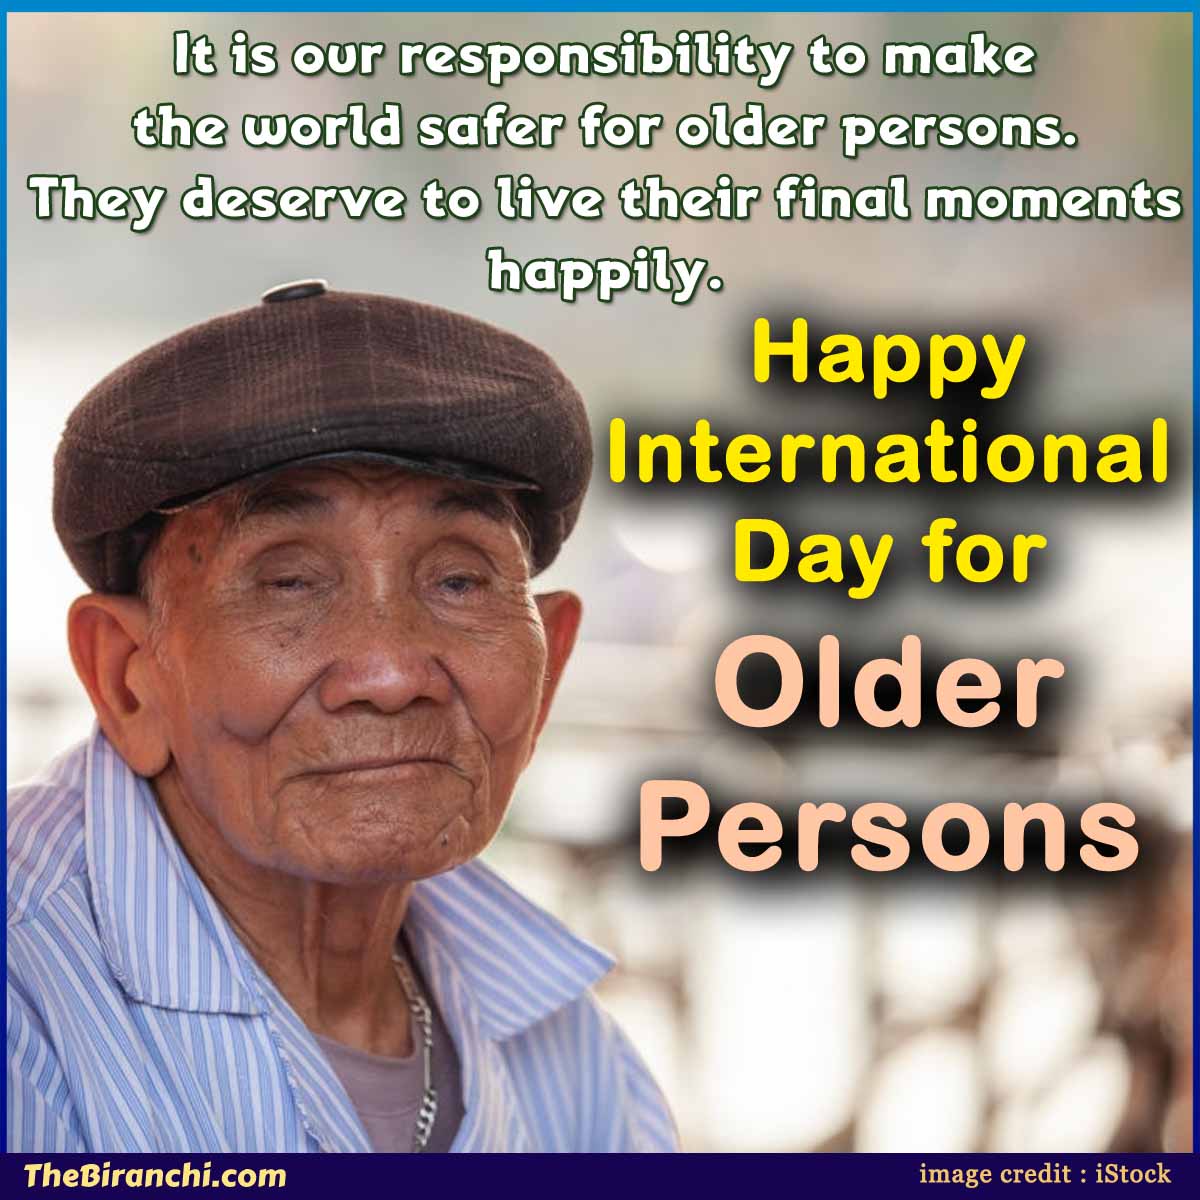 International-Day-of-Elder-Persons-our-responsibility-to-make-the-world-safer-for-older-persons-Quotes